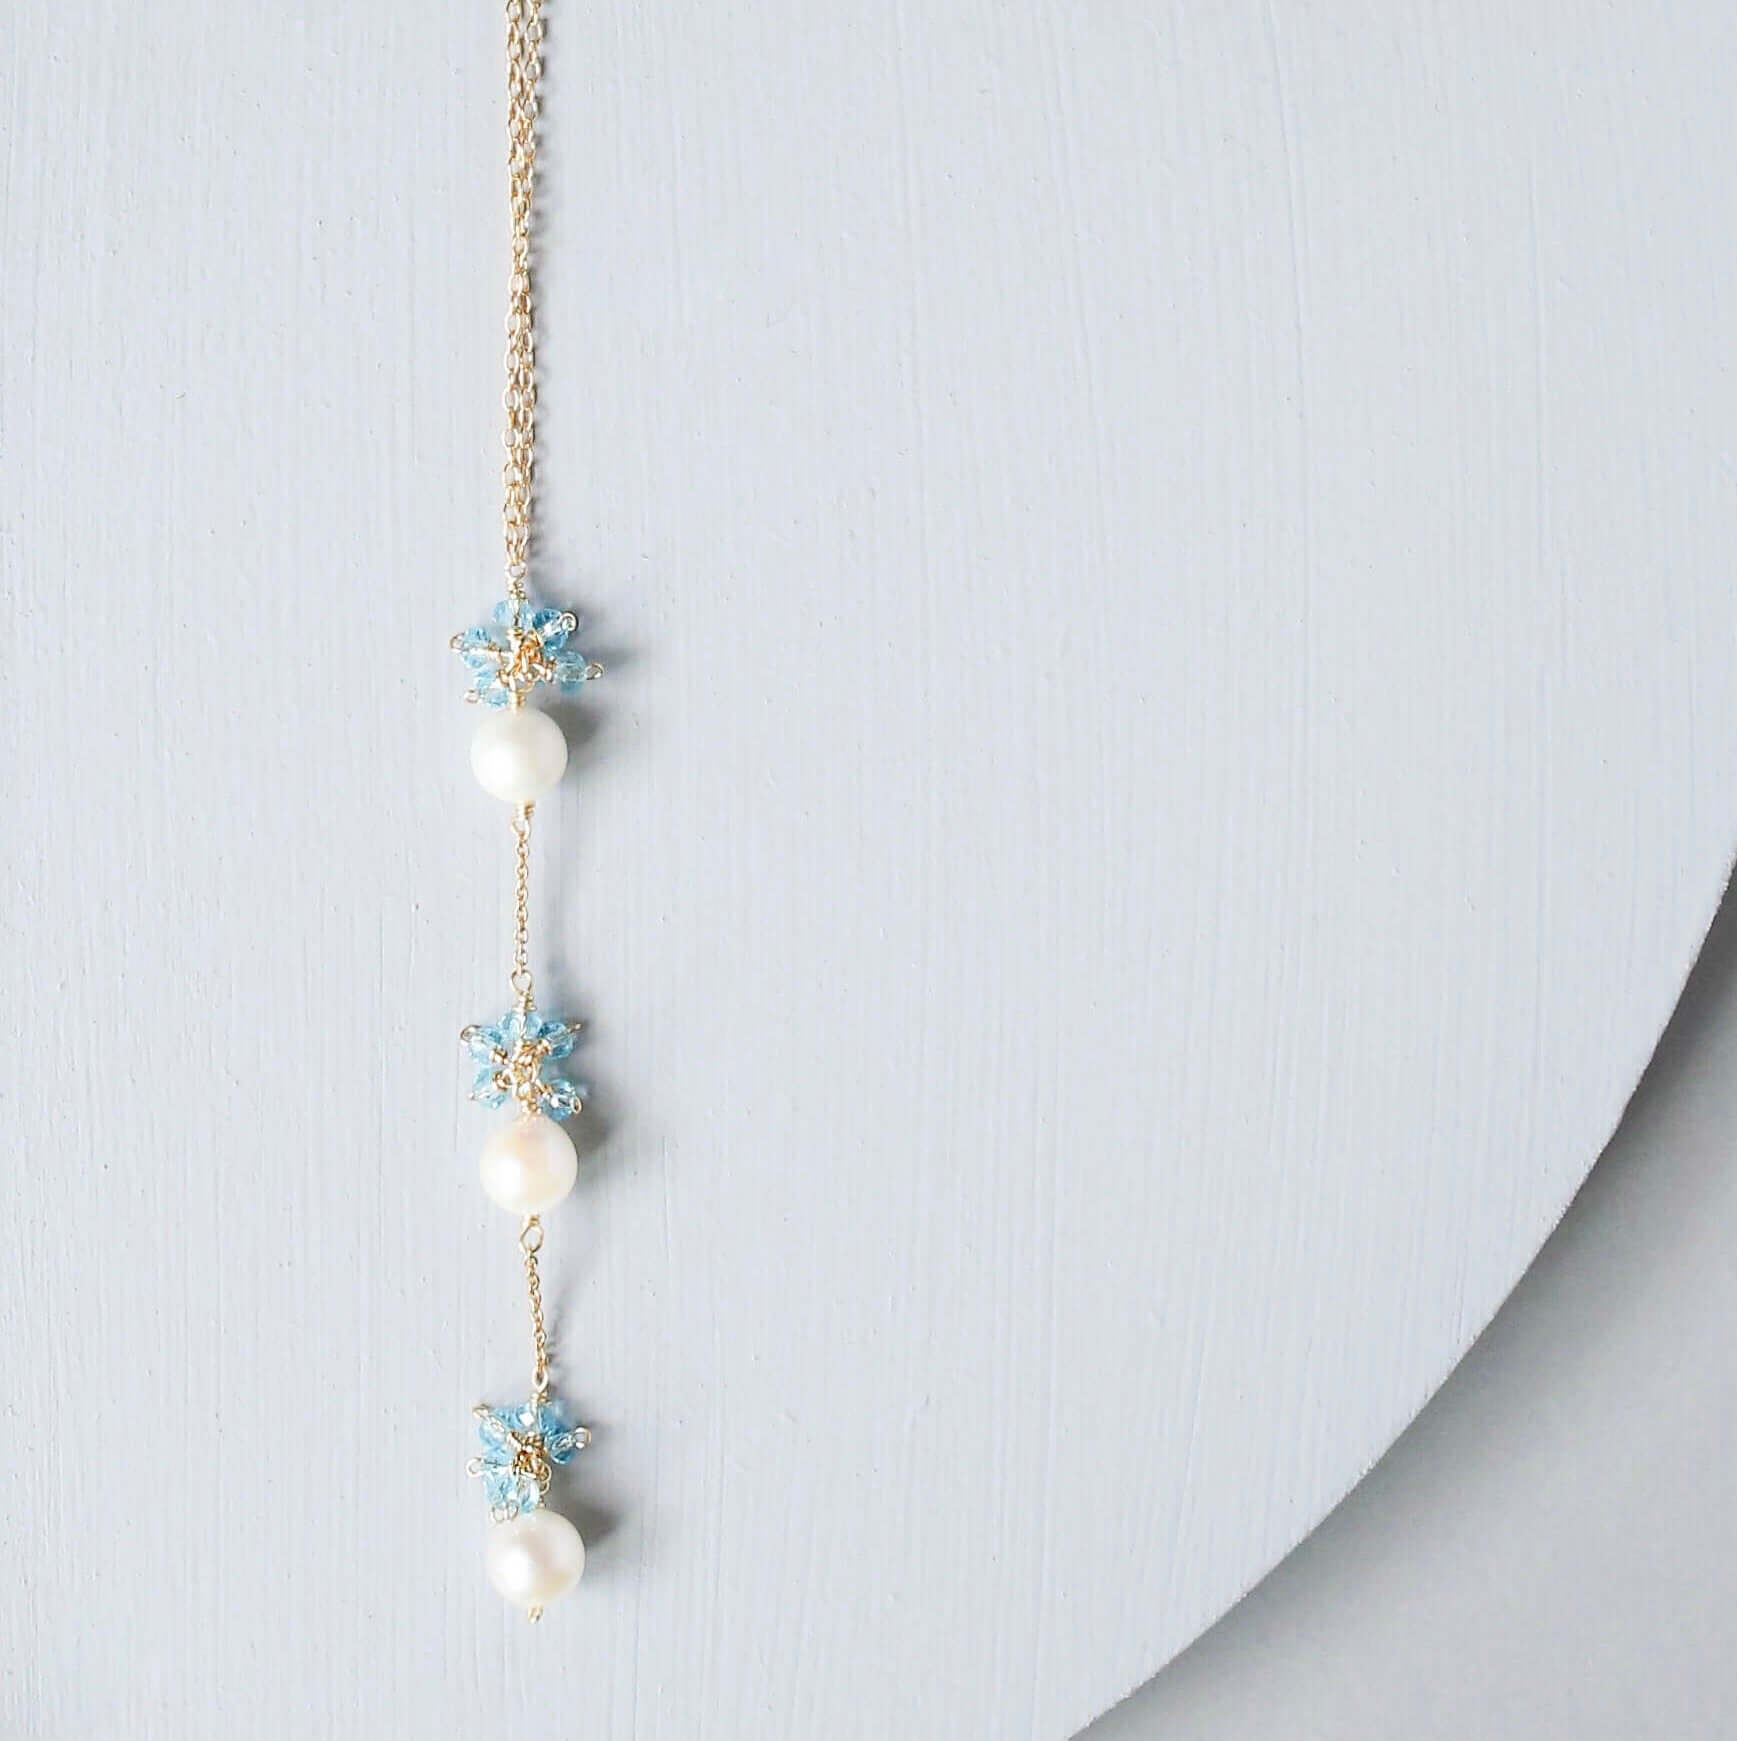 Gold plated Necklace with 3 white freshwater bead pearls paired with genuine aquamarine quartz gemstones